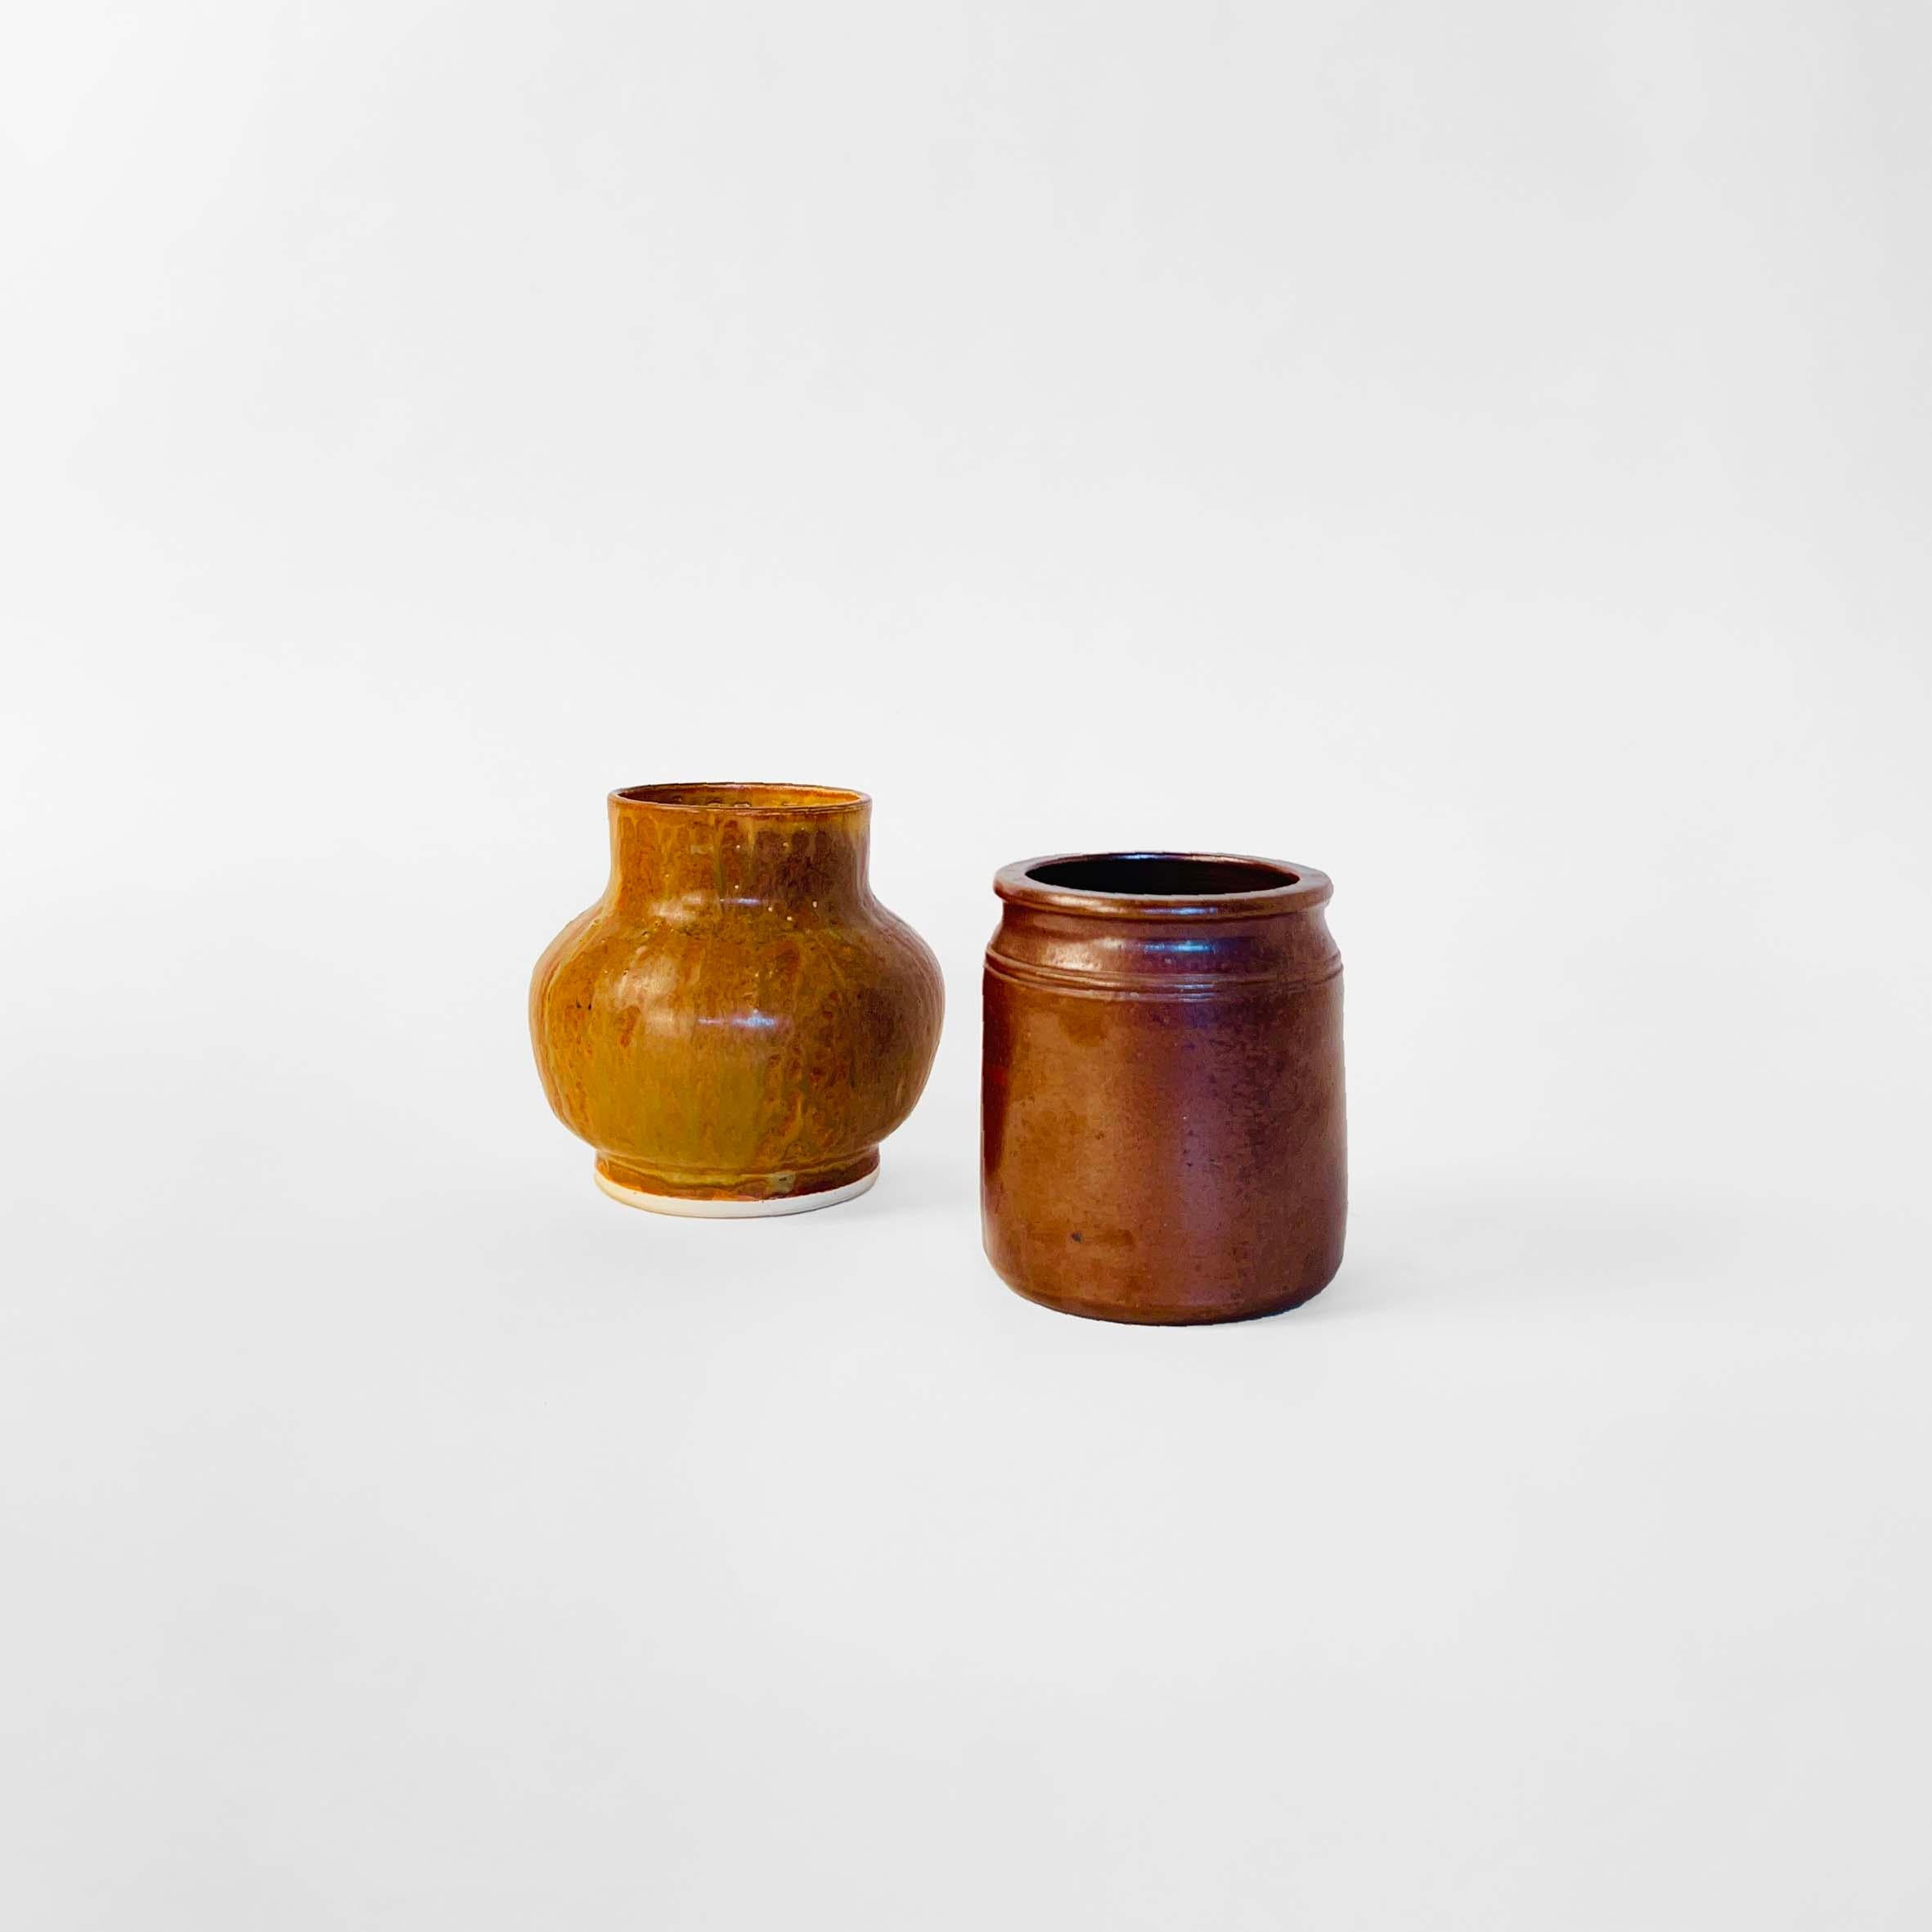 Wallåkra cylinder shape dark brown vase, made in Sweden. Paired with a California Pottery vase, with organic shape and finish in light brown glaze.
DIMENSIONS
DARK BROWN VASE WALLAKRA
Height 4.25 IN / 10.79 CM
Diam 4 IN / 10.16 CM
LIGHT